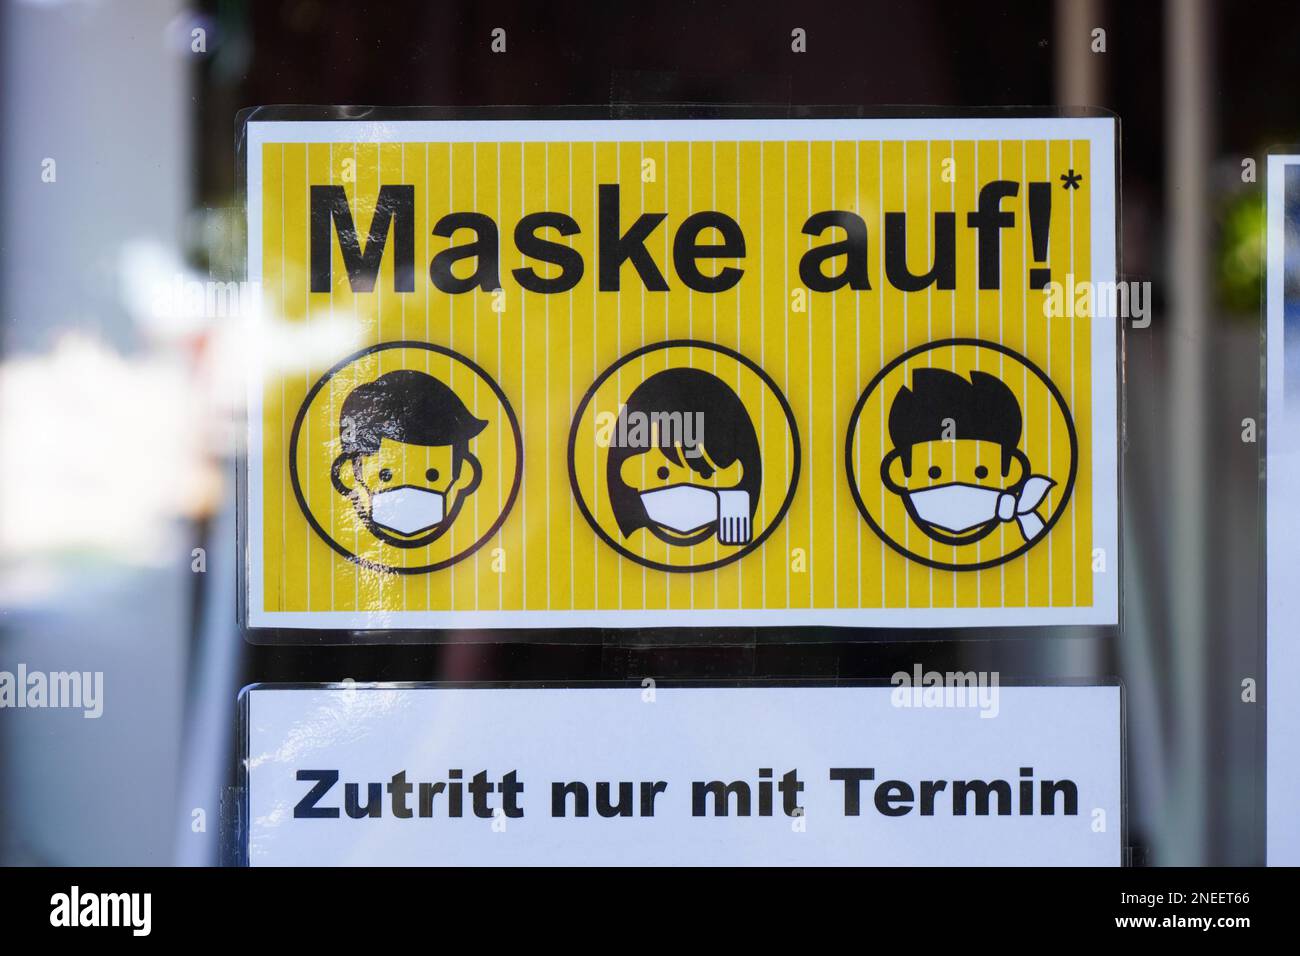 Hannover, Germany - June 1, 2020: German language sign on entrance door to tattoo parlor advises that face mask is mandatory and entry by appointment Stock Photo